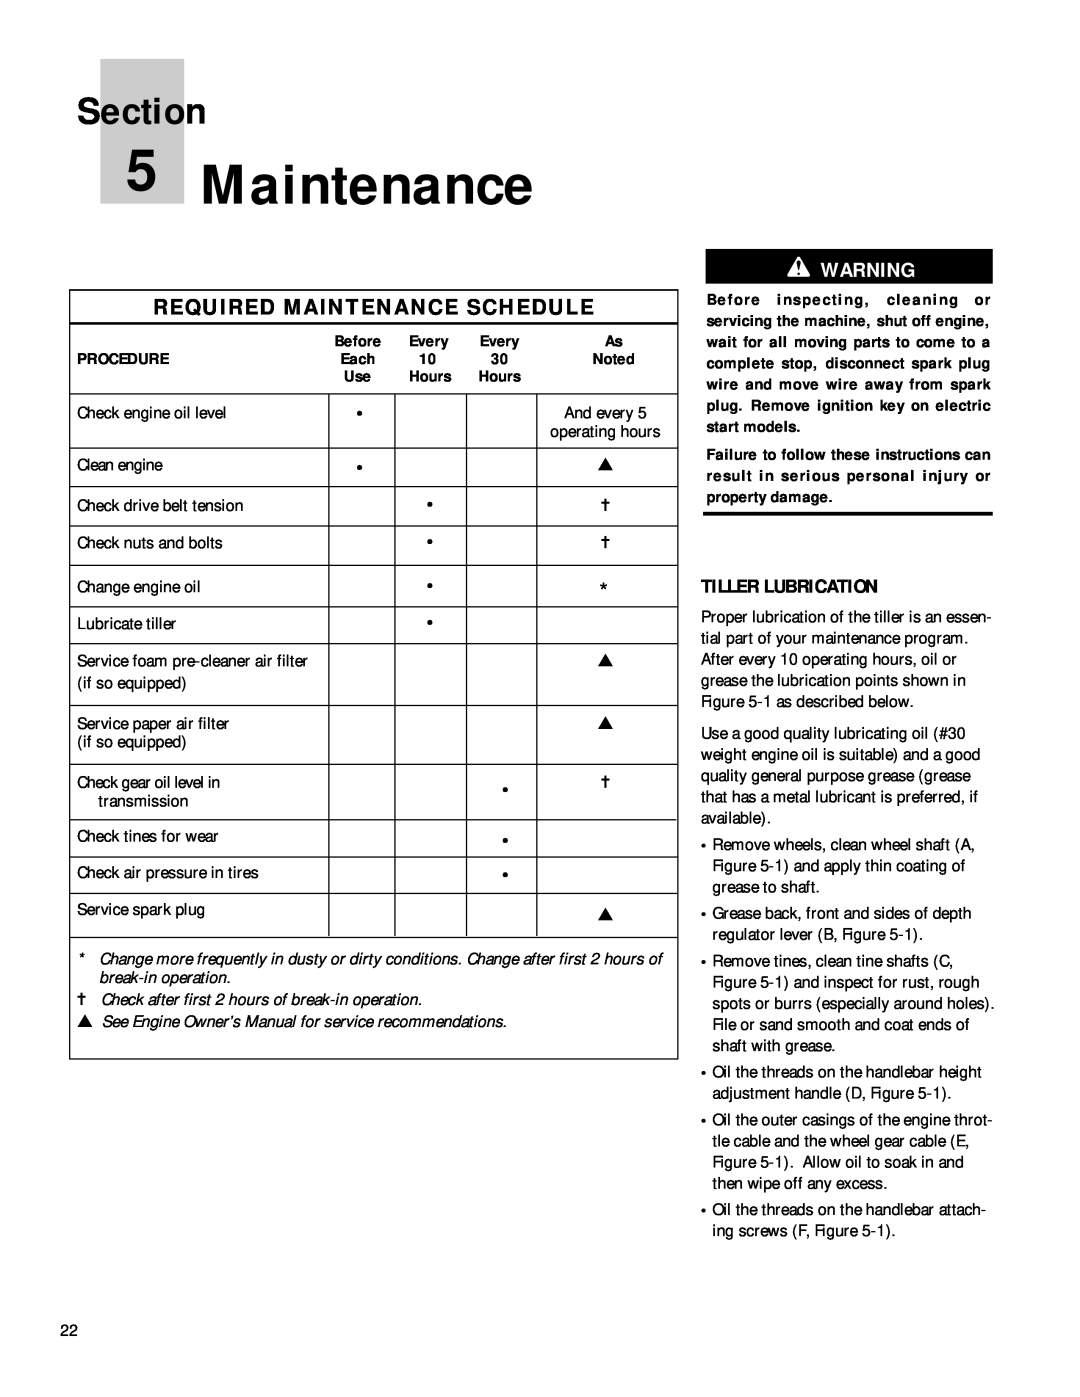 Troy-Bilt 12212, 12211 owner manual Required Maintenance Schedule, Tiller Lubrication, Every, Procedure, Hours, Section 